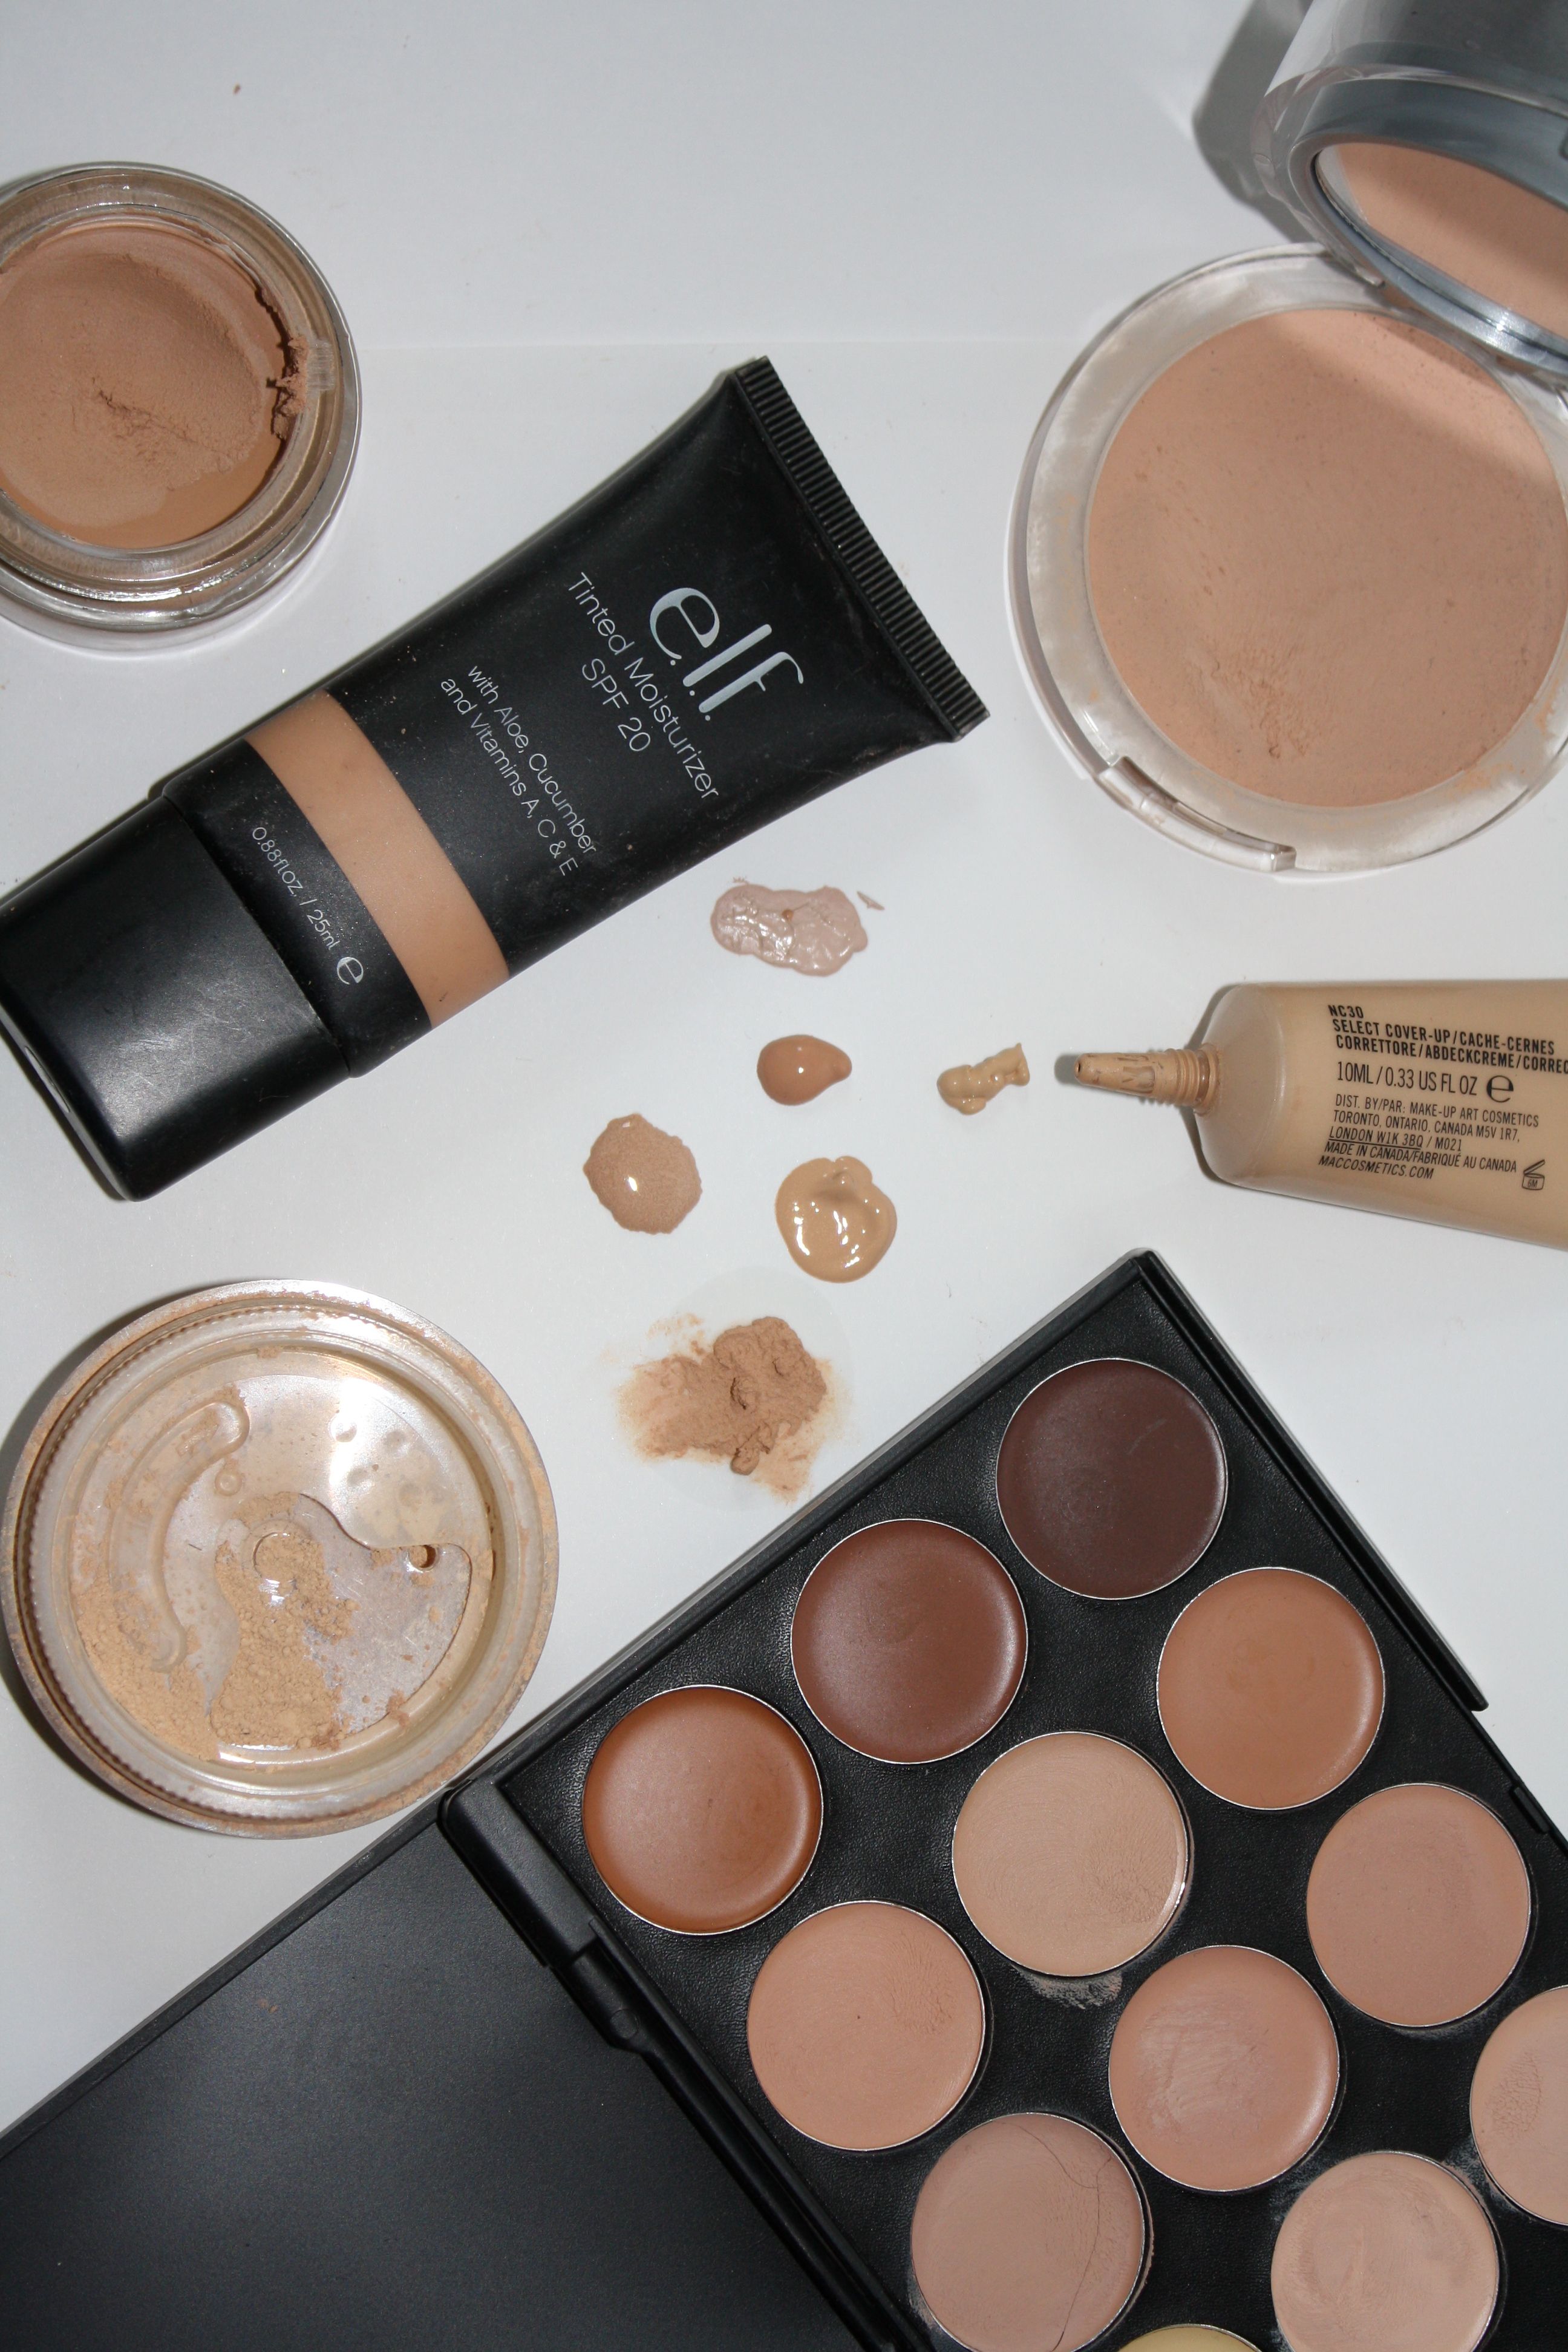 How to find your perfect shade of foundation – from a makeup artist